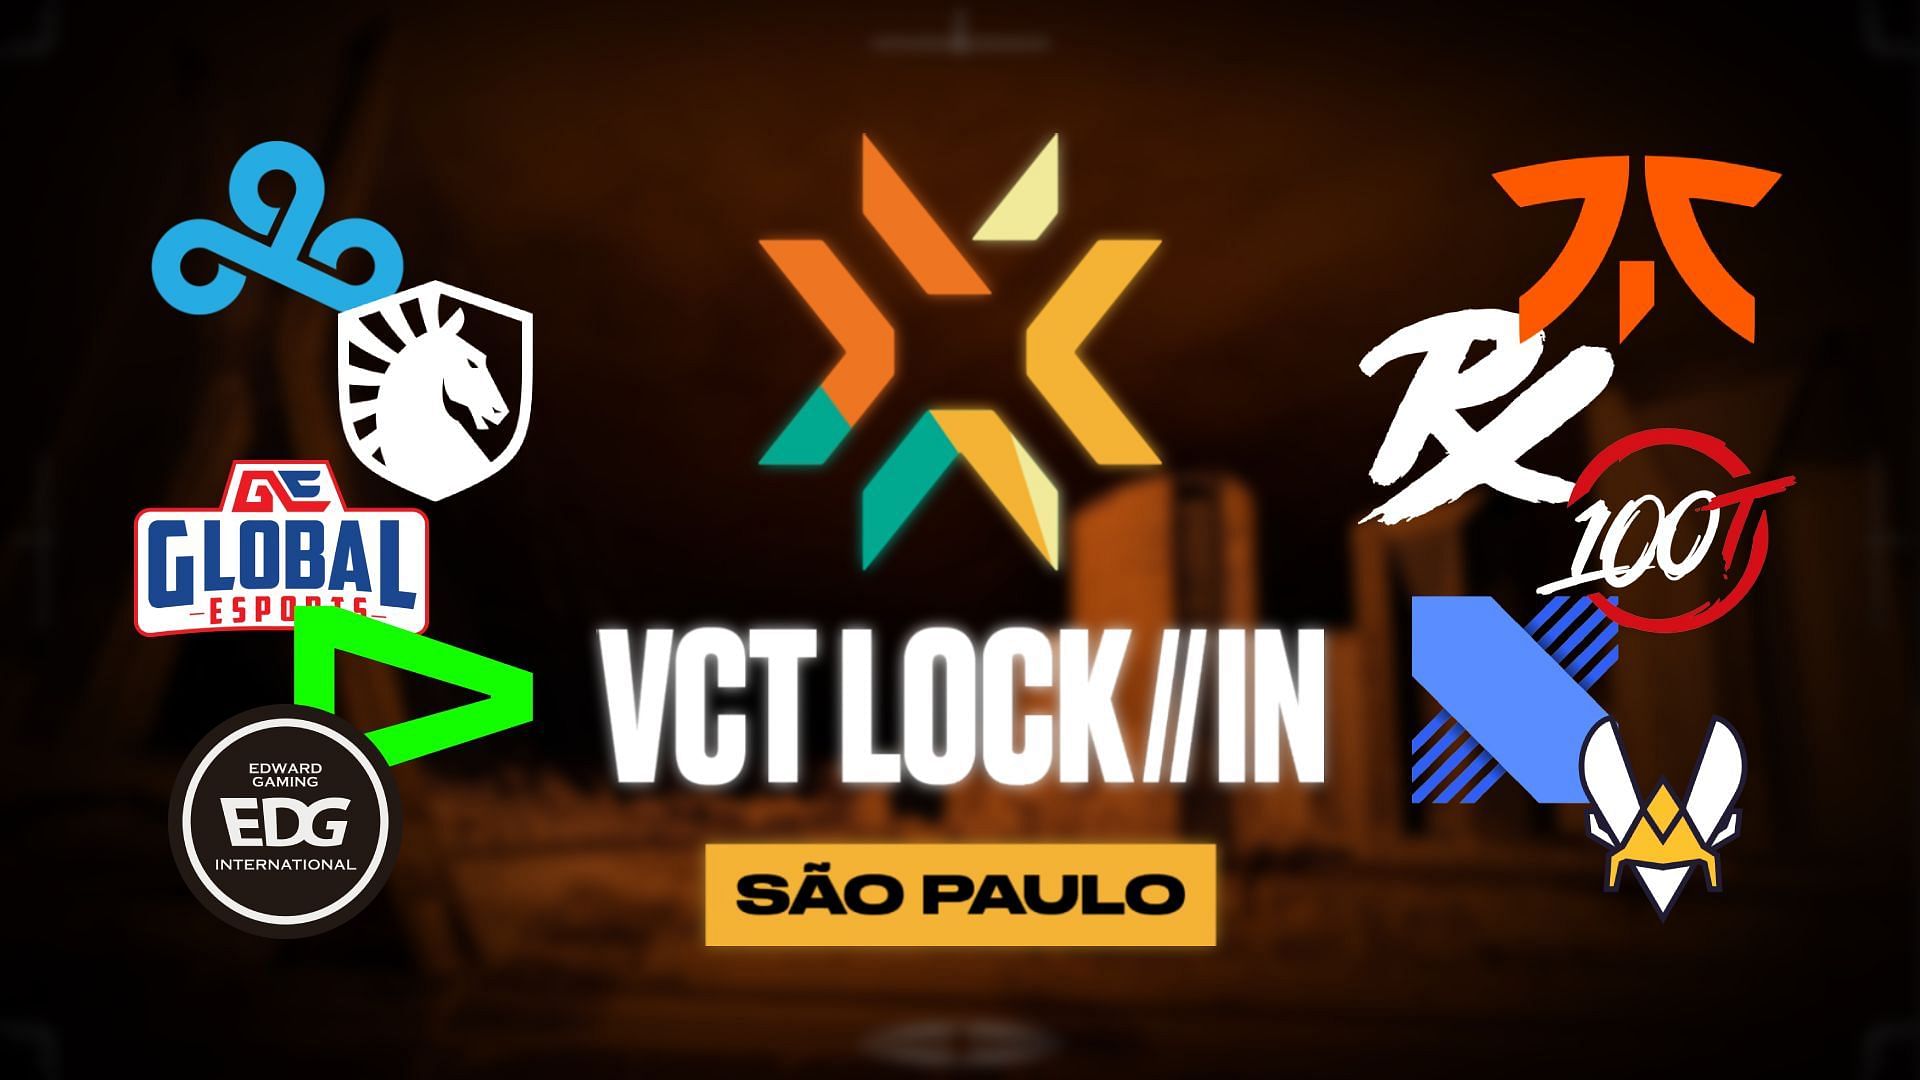 32 teams are going to play for an extra spot for their region at VCT LOCK//IN in Sao Paolo (Image via Sportskeeda)